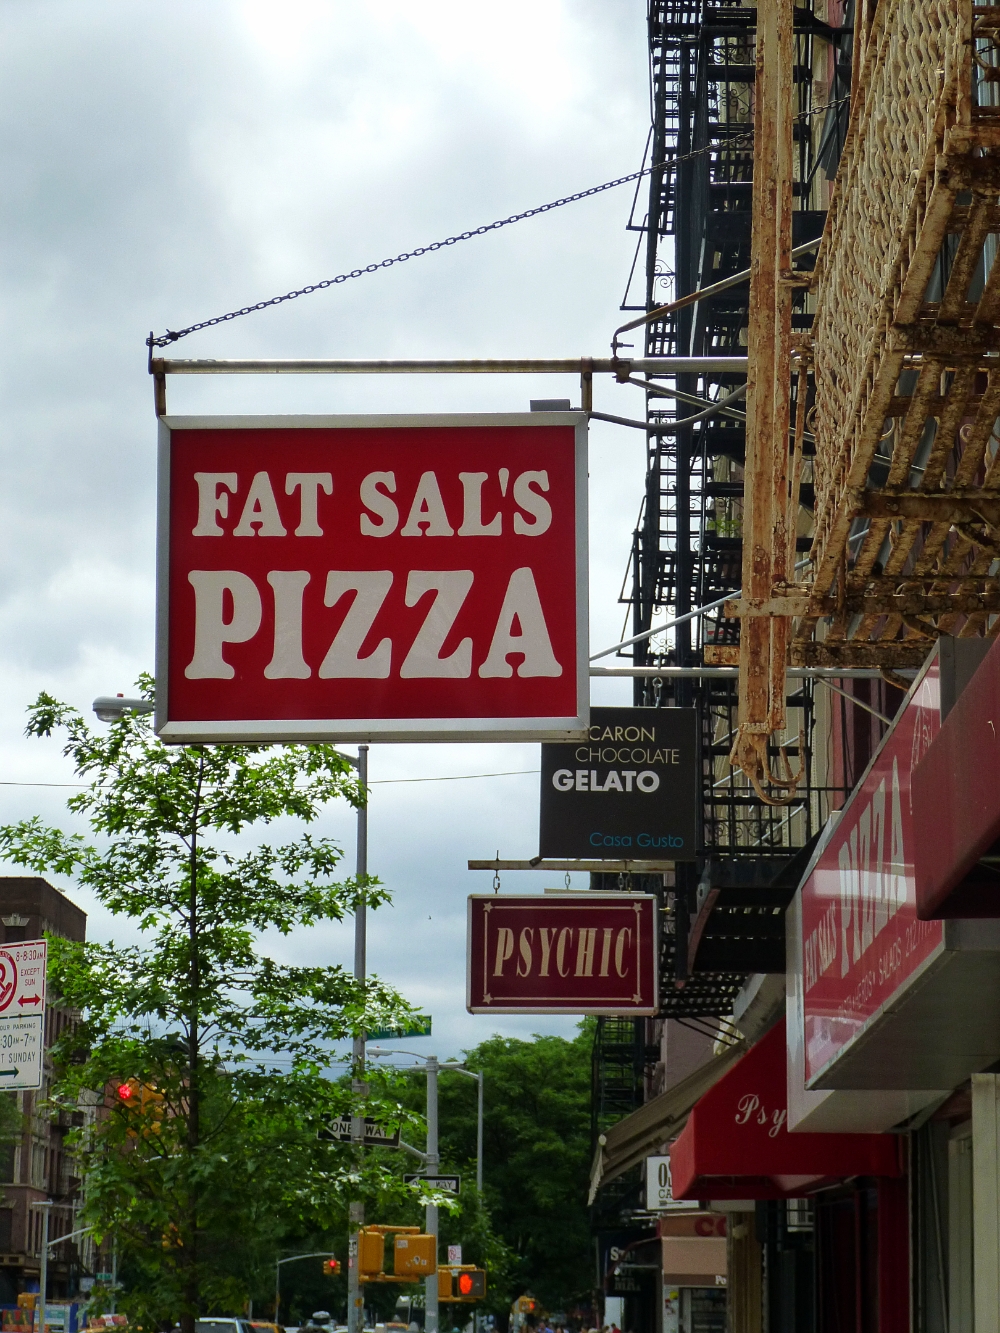 a fast food pizza restaurant sign hanging from the side of a building